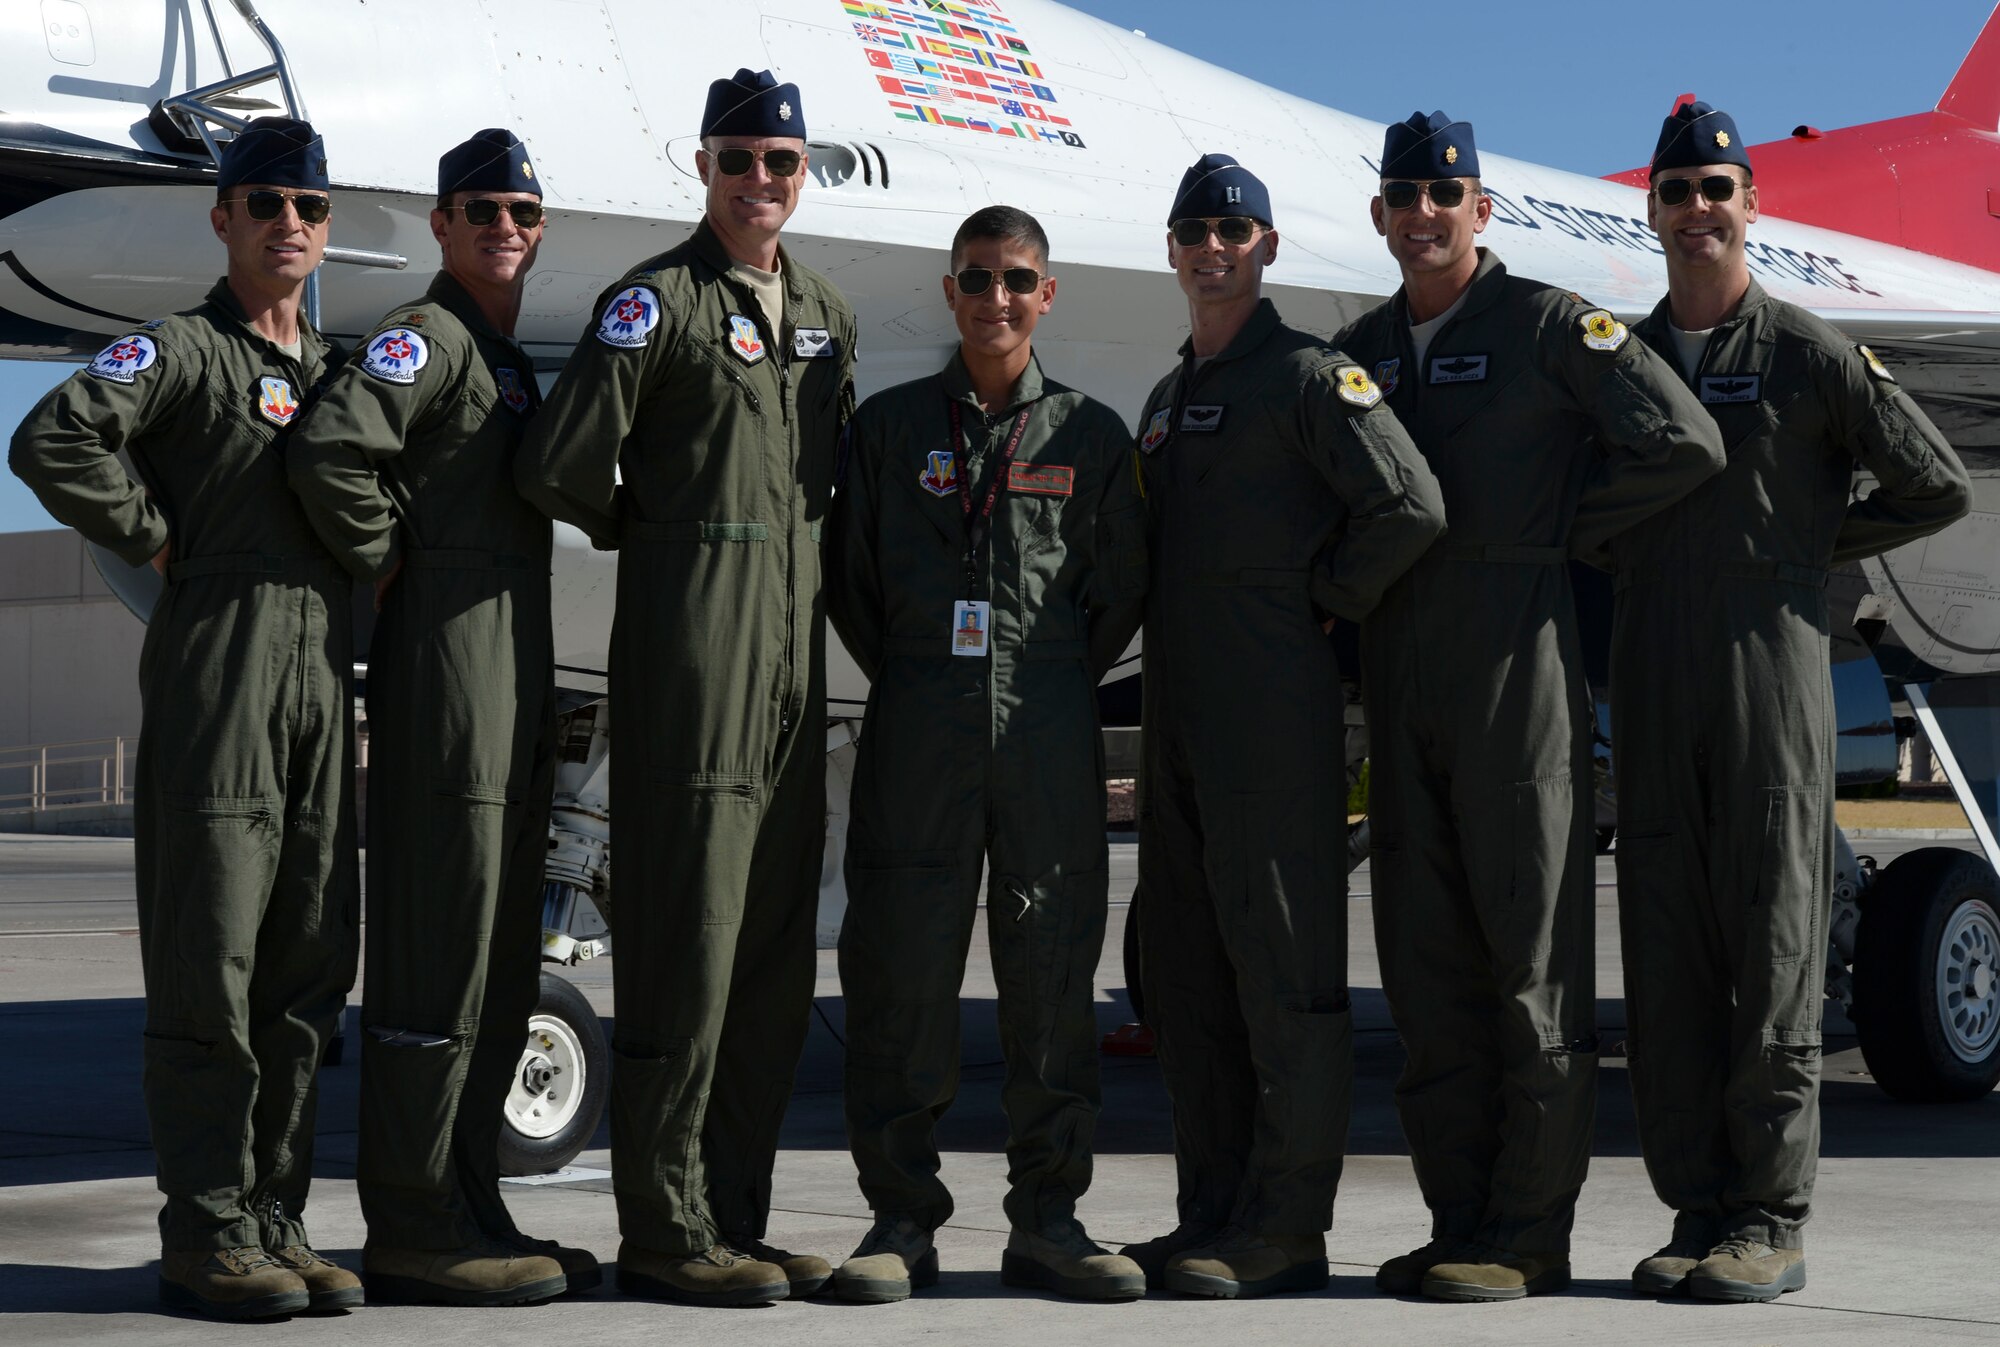 U.S. Air Force Air Demonstration Squadron pilots one through six pose for a photo with Reymond during his visit to Nellis Air Force Base, Nev., July 19, 2016. The first part of his day was spent with the Thunderbirds team members where he got to partake in their launch and recovery. (U.S. Air Force photo by Senior Airman Tabatha McCarthy)